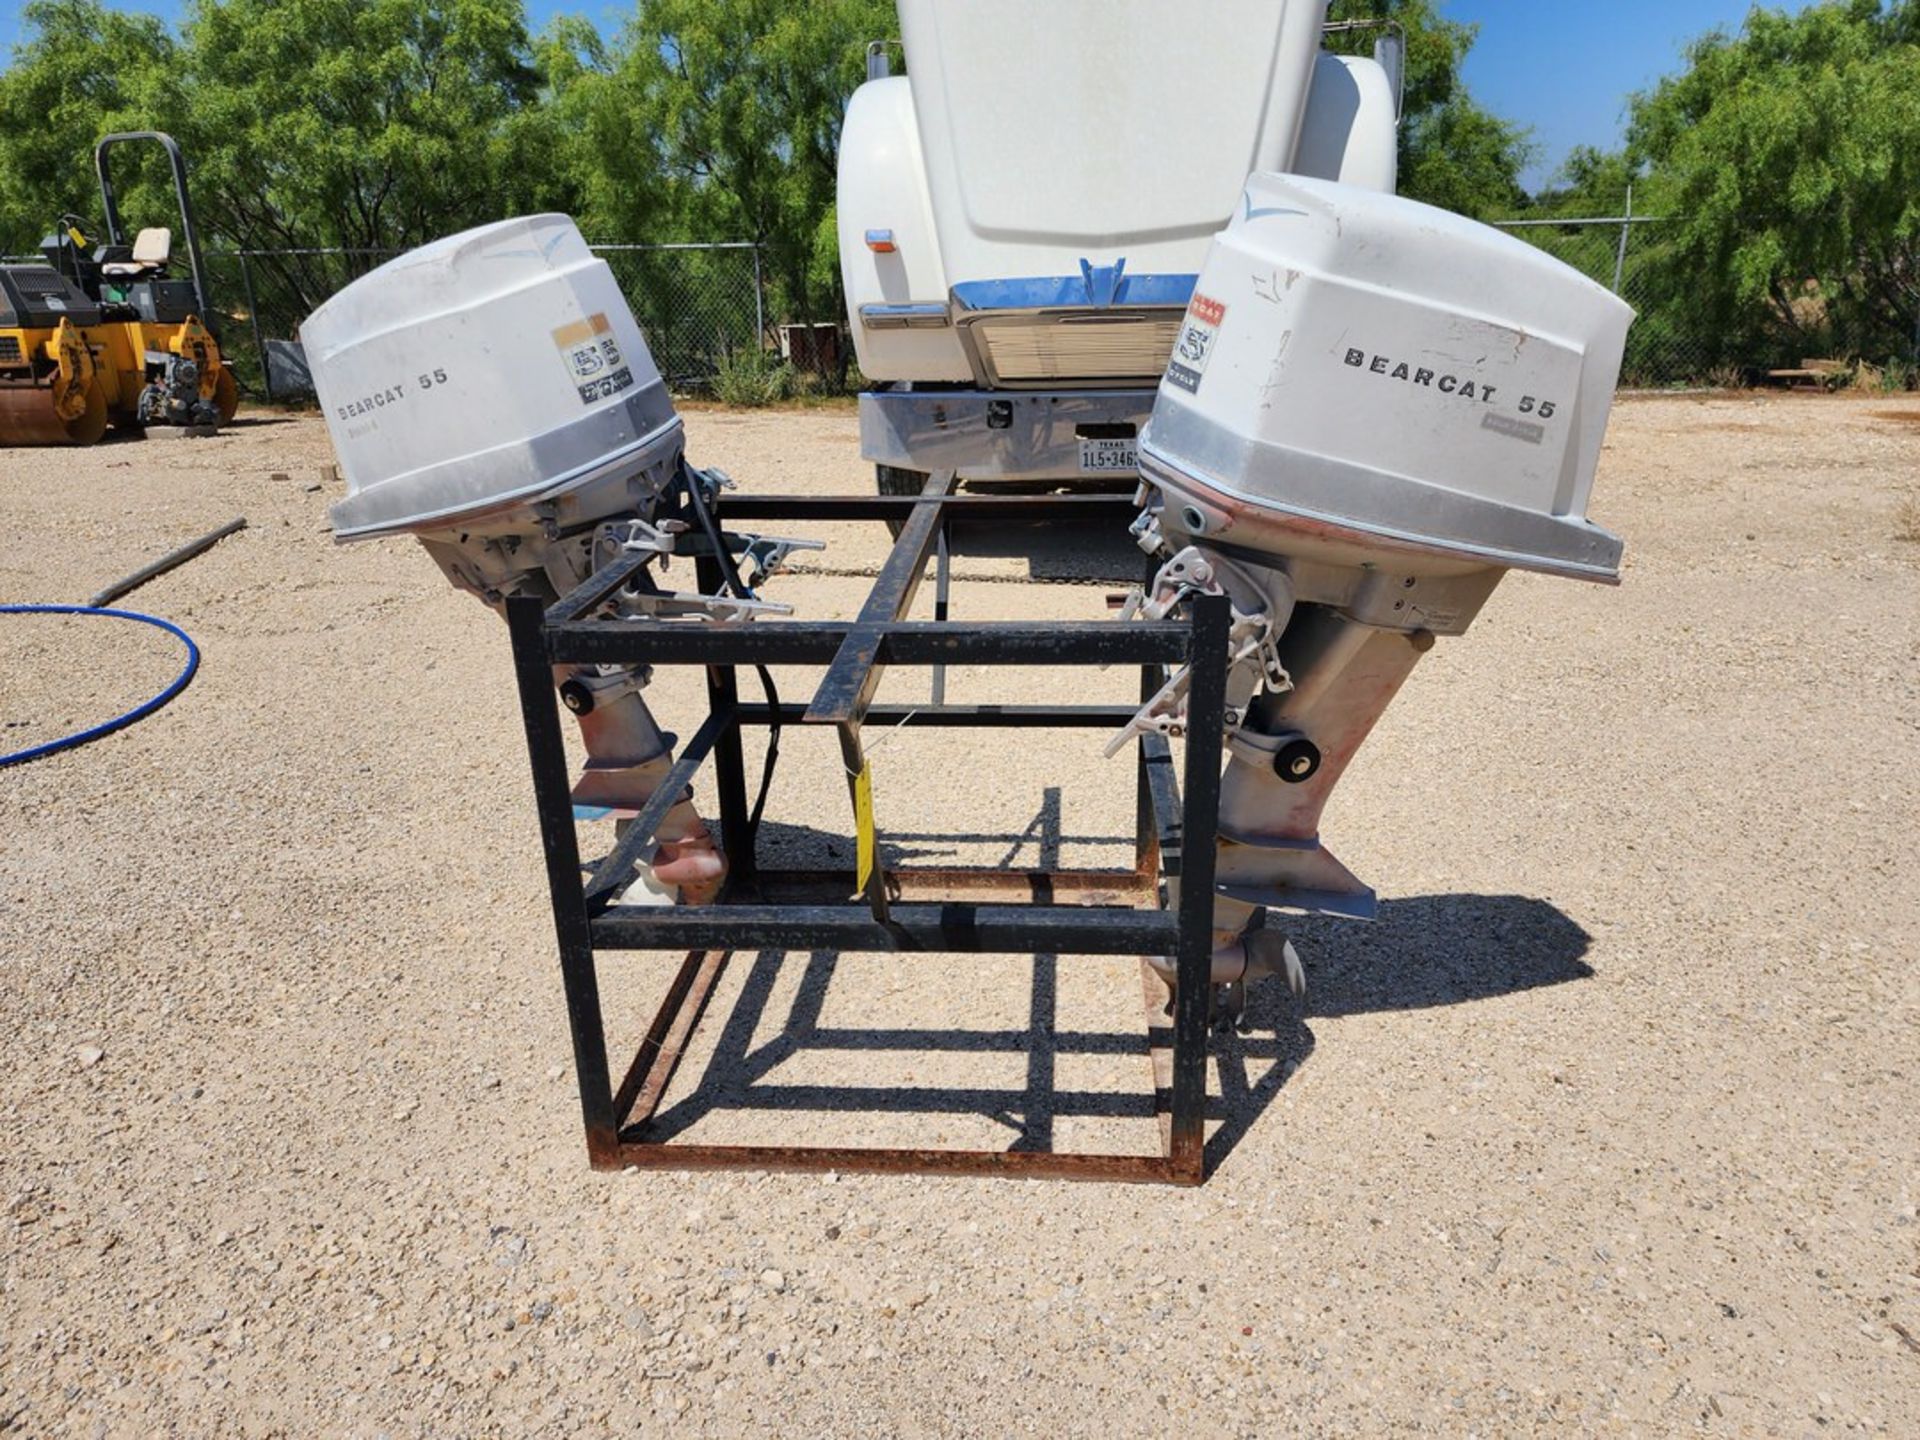 Fisher-Pierce Bearcat 55 (2) Outboard Motors 4-Cycle Outboard